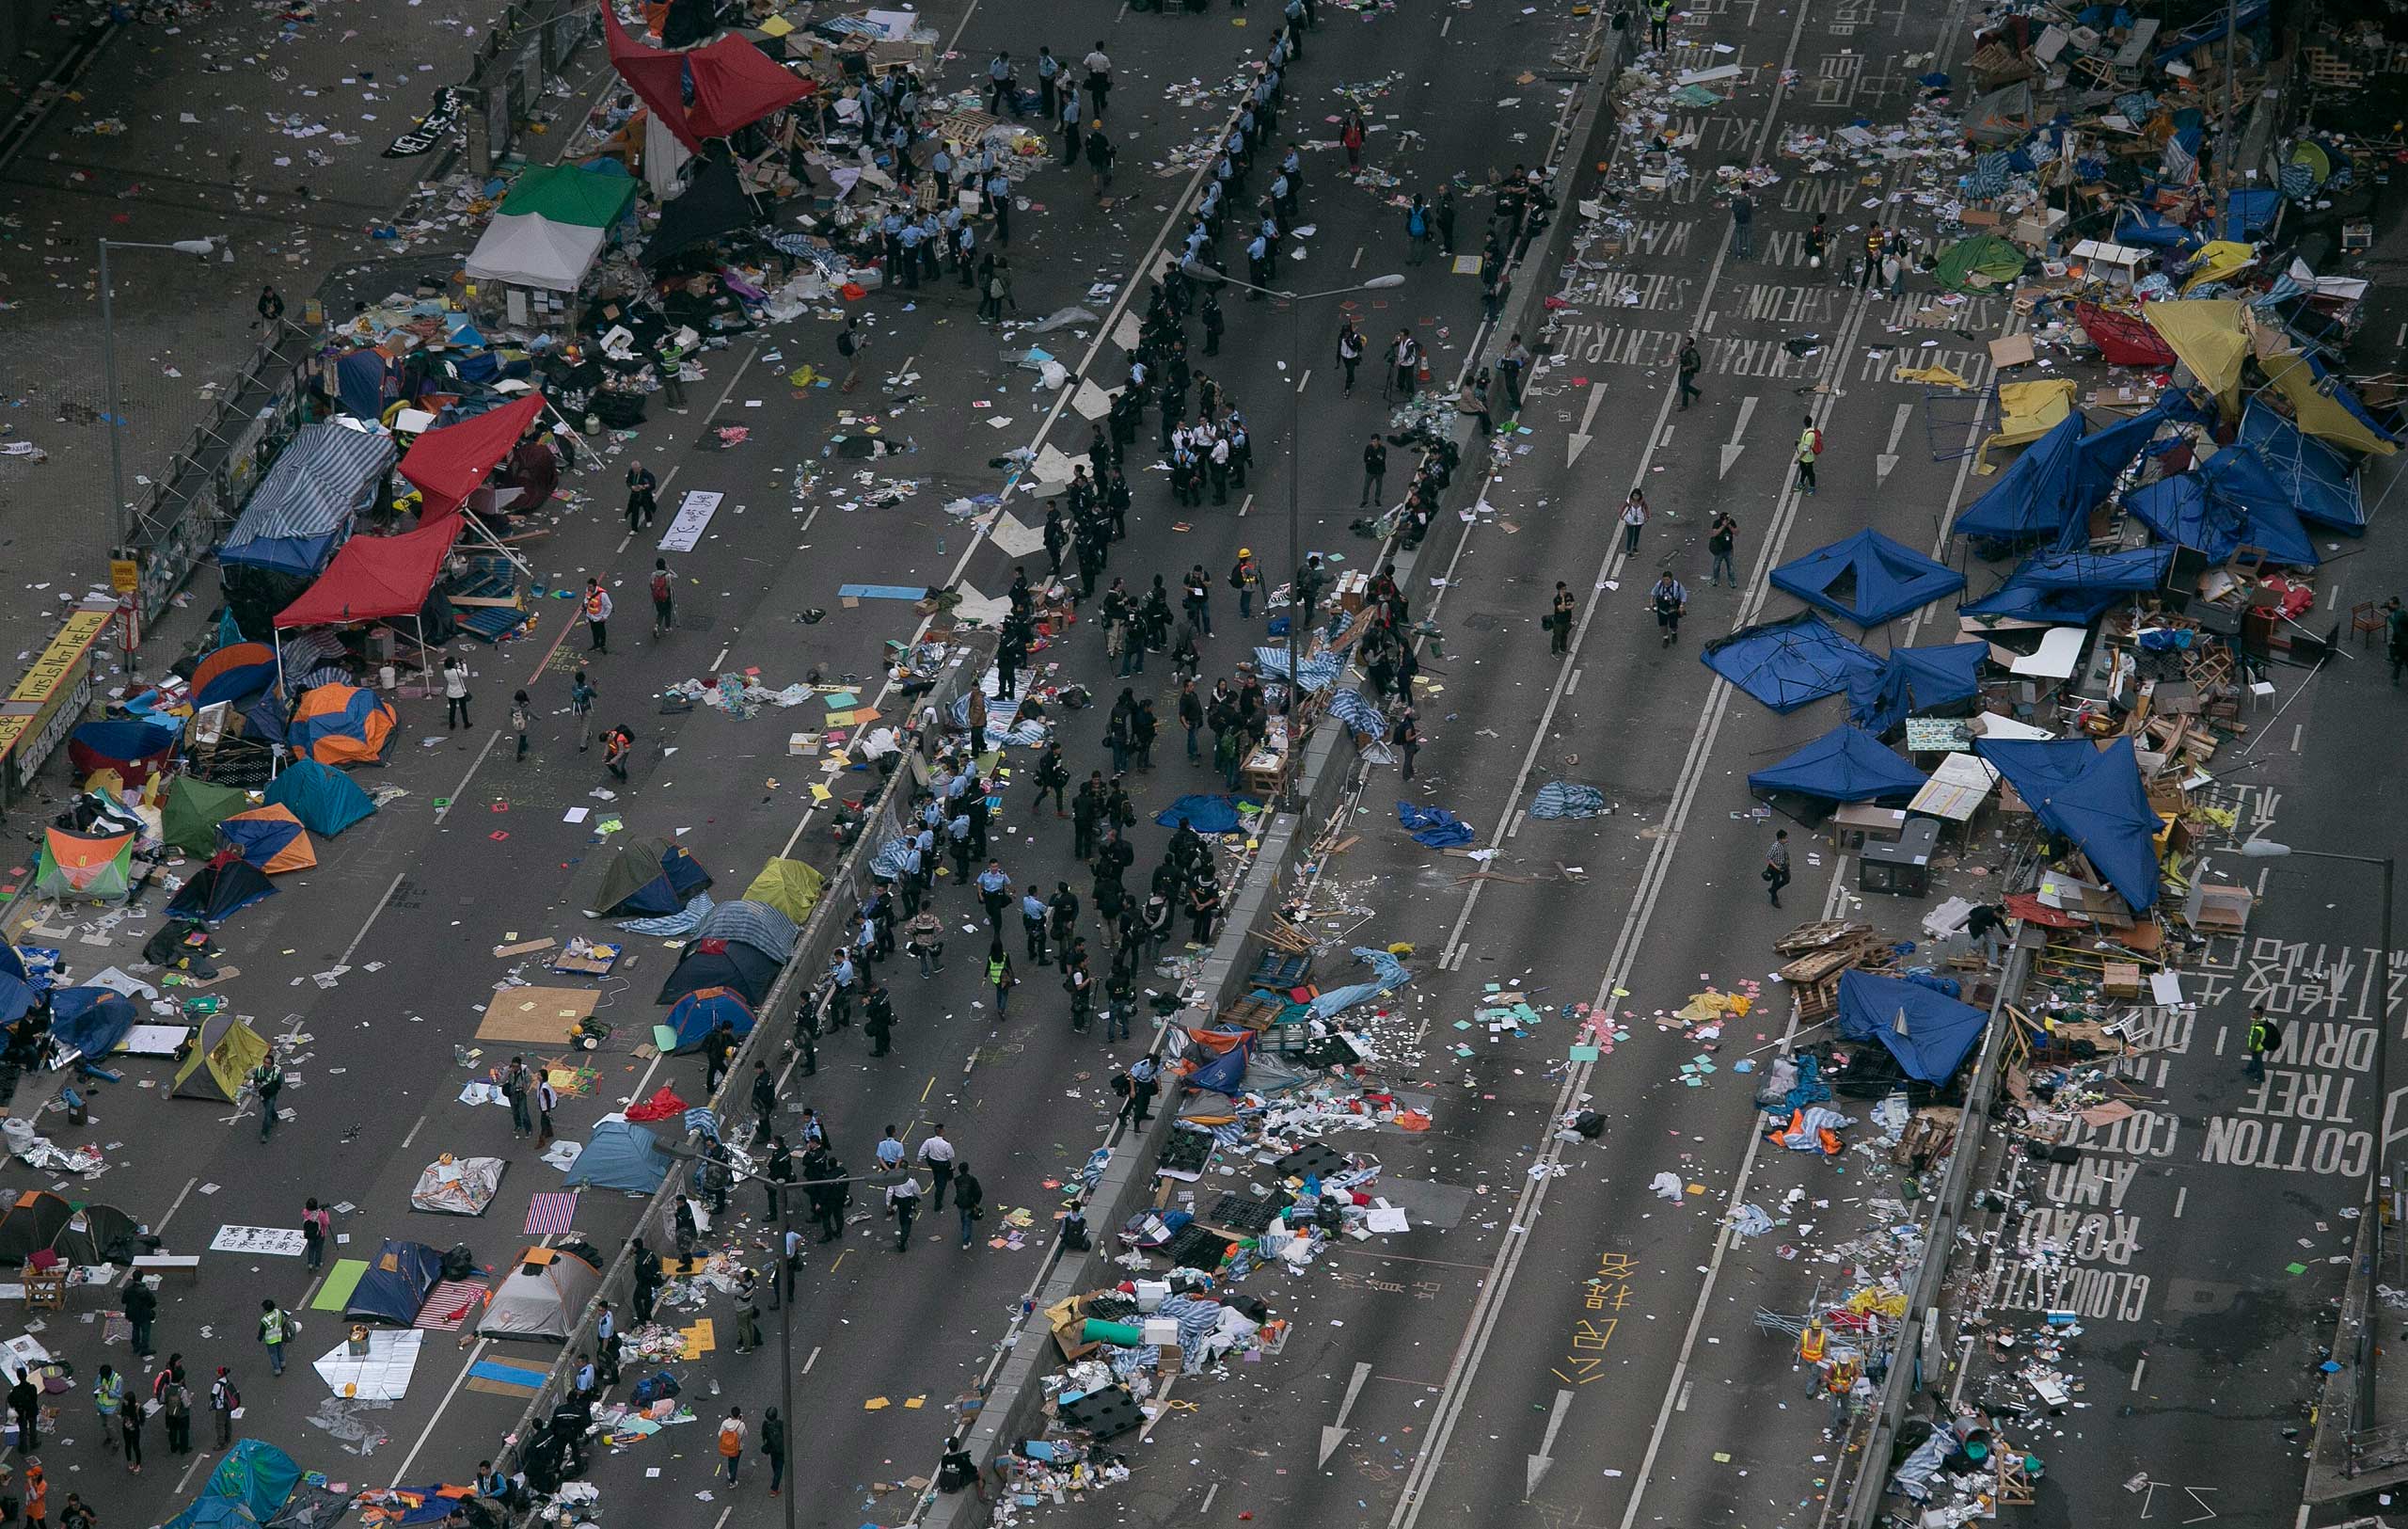 Dec. 11, 2014. A view of a main road after police cleared barricades and tents outside government headquarters in Hong Kong. Police took away demonstrators who refused to leave the main pro-democracy protest camp and tore down their tents in a final push to retake streets occupied by activists for two and a half months.